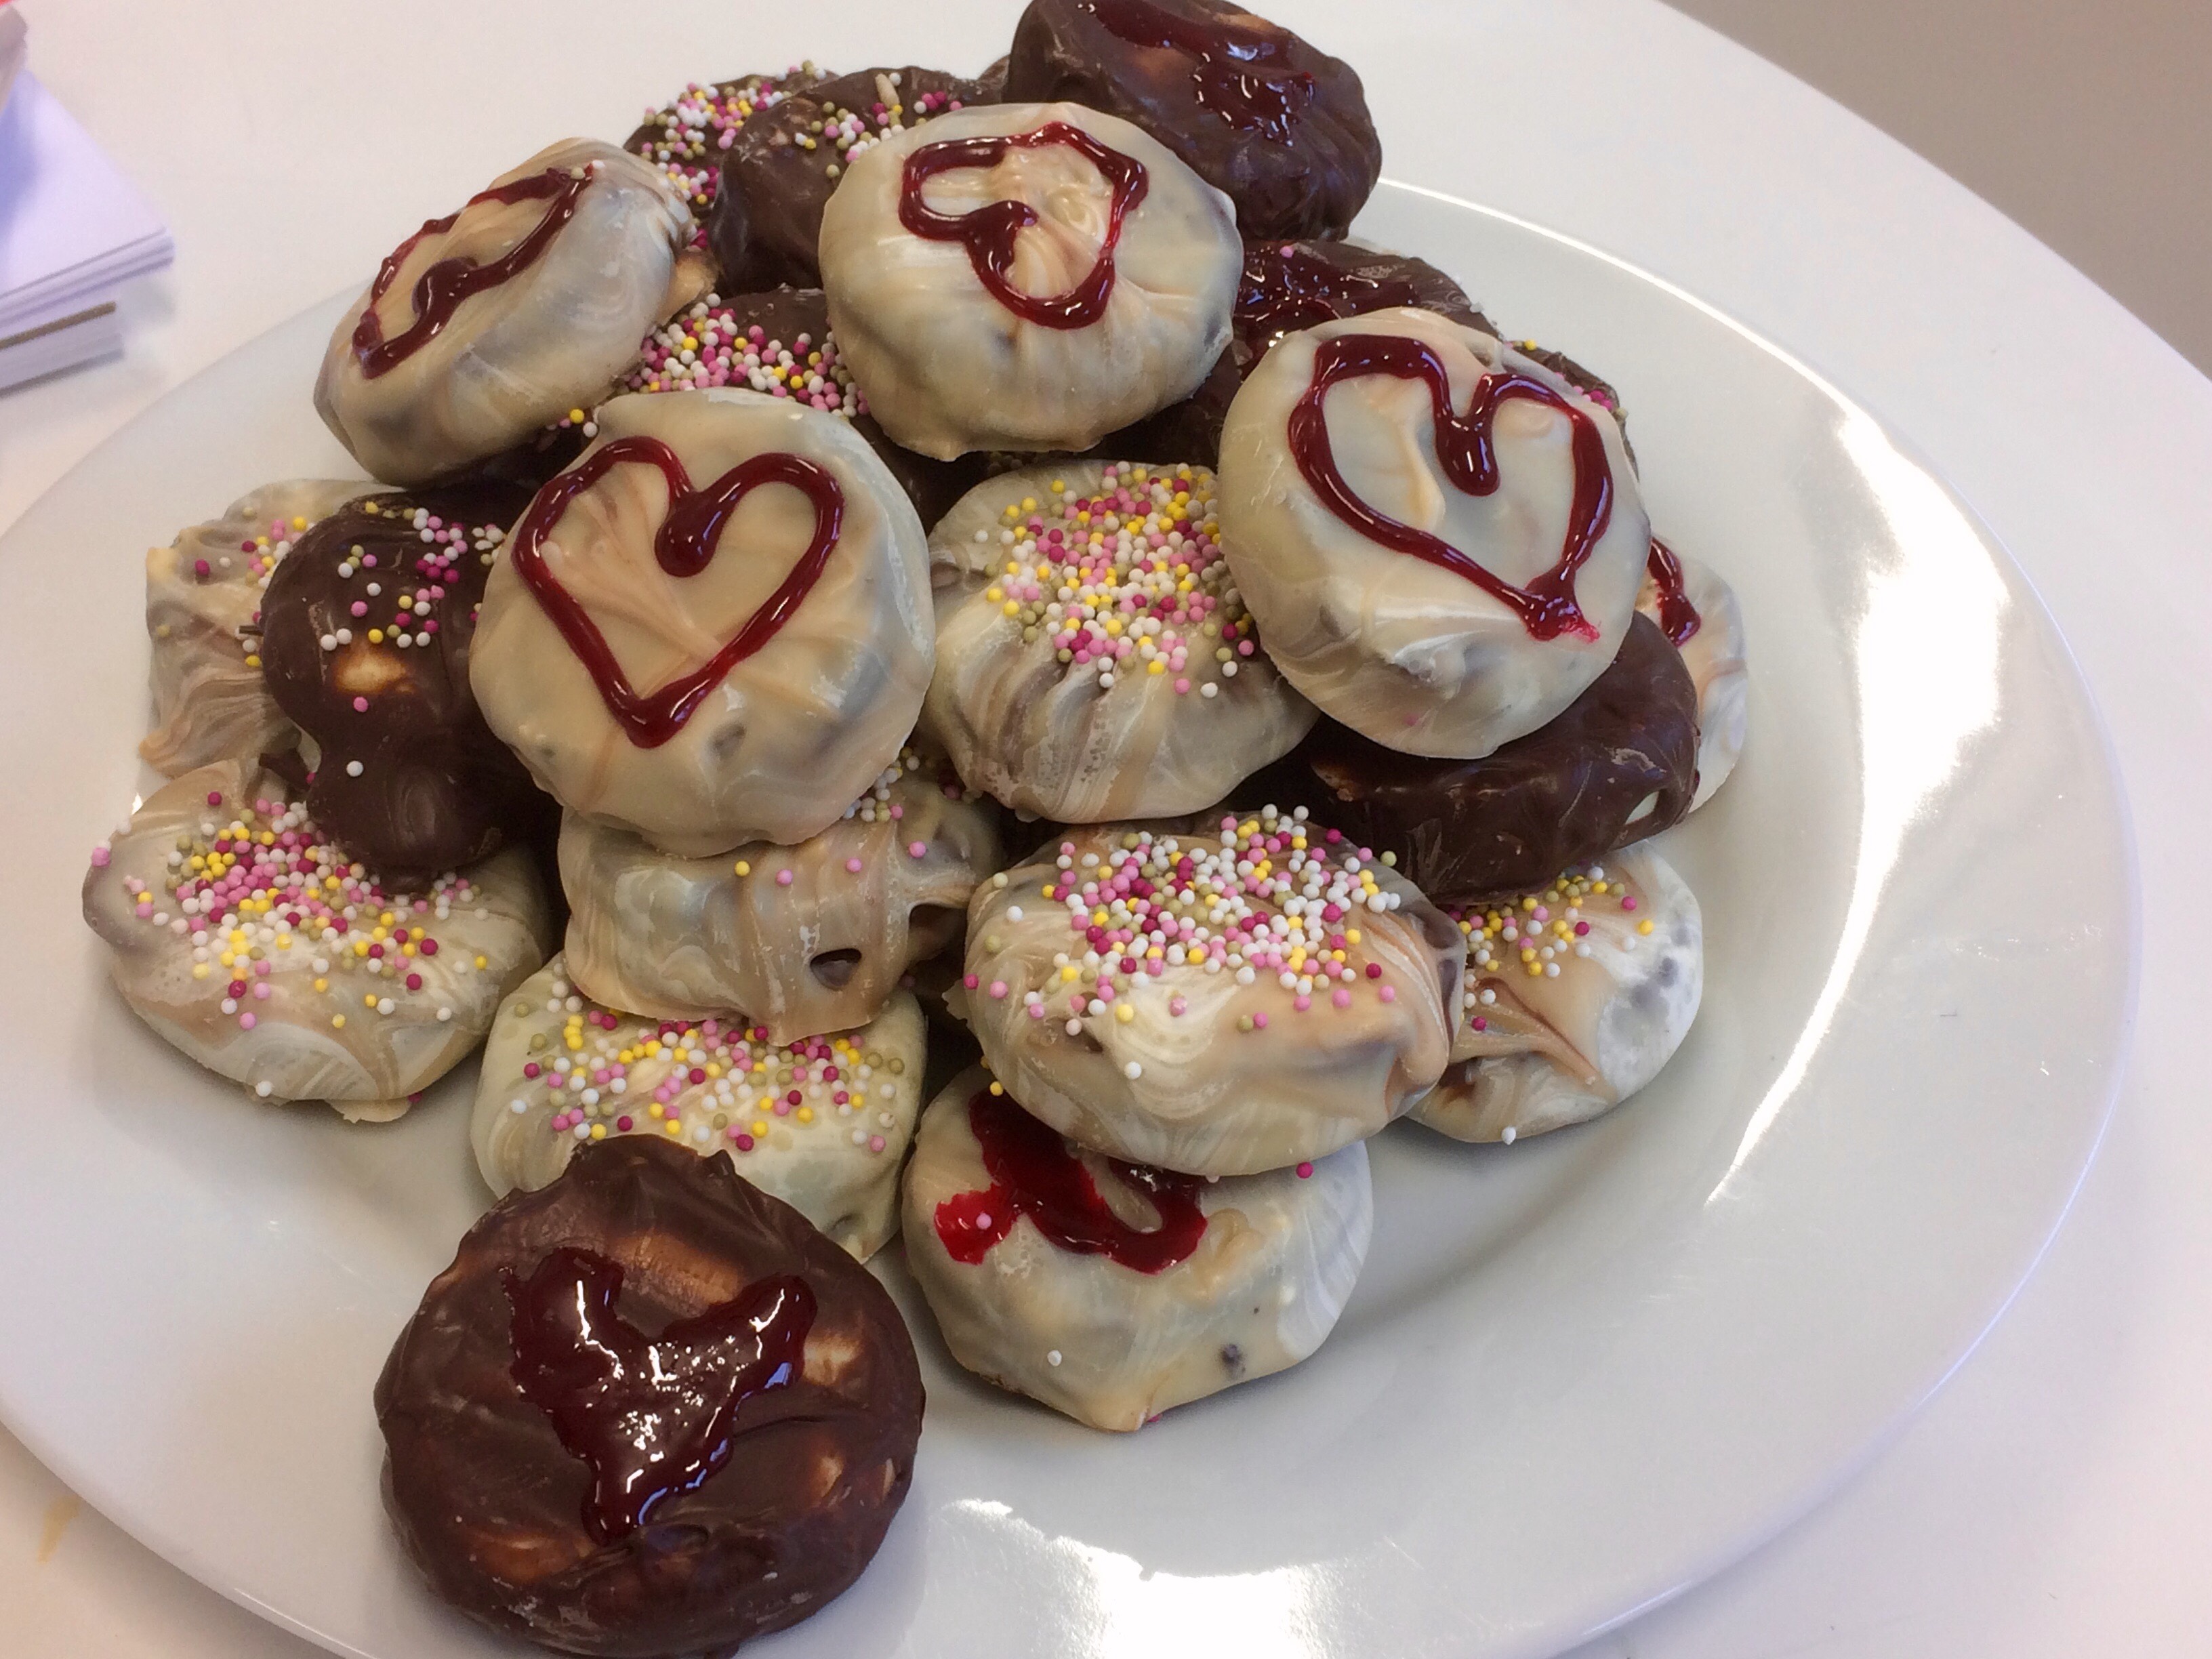 Double dipped oreos with milk chocolate and white chocolate, some have designs of hearts in icing on the top. The biscuits are arranged on a plate.